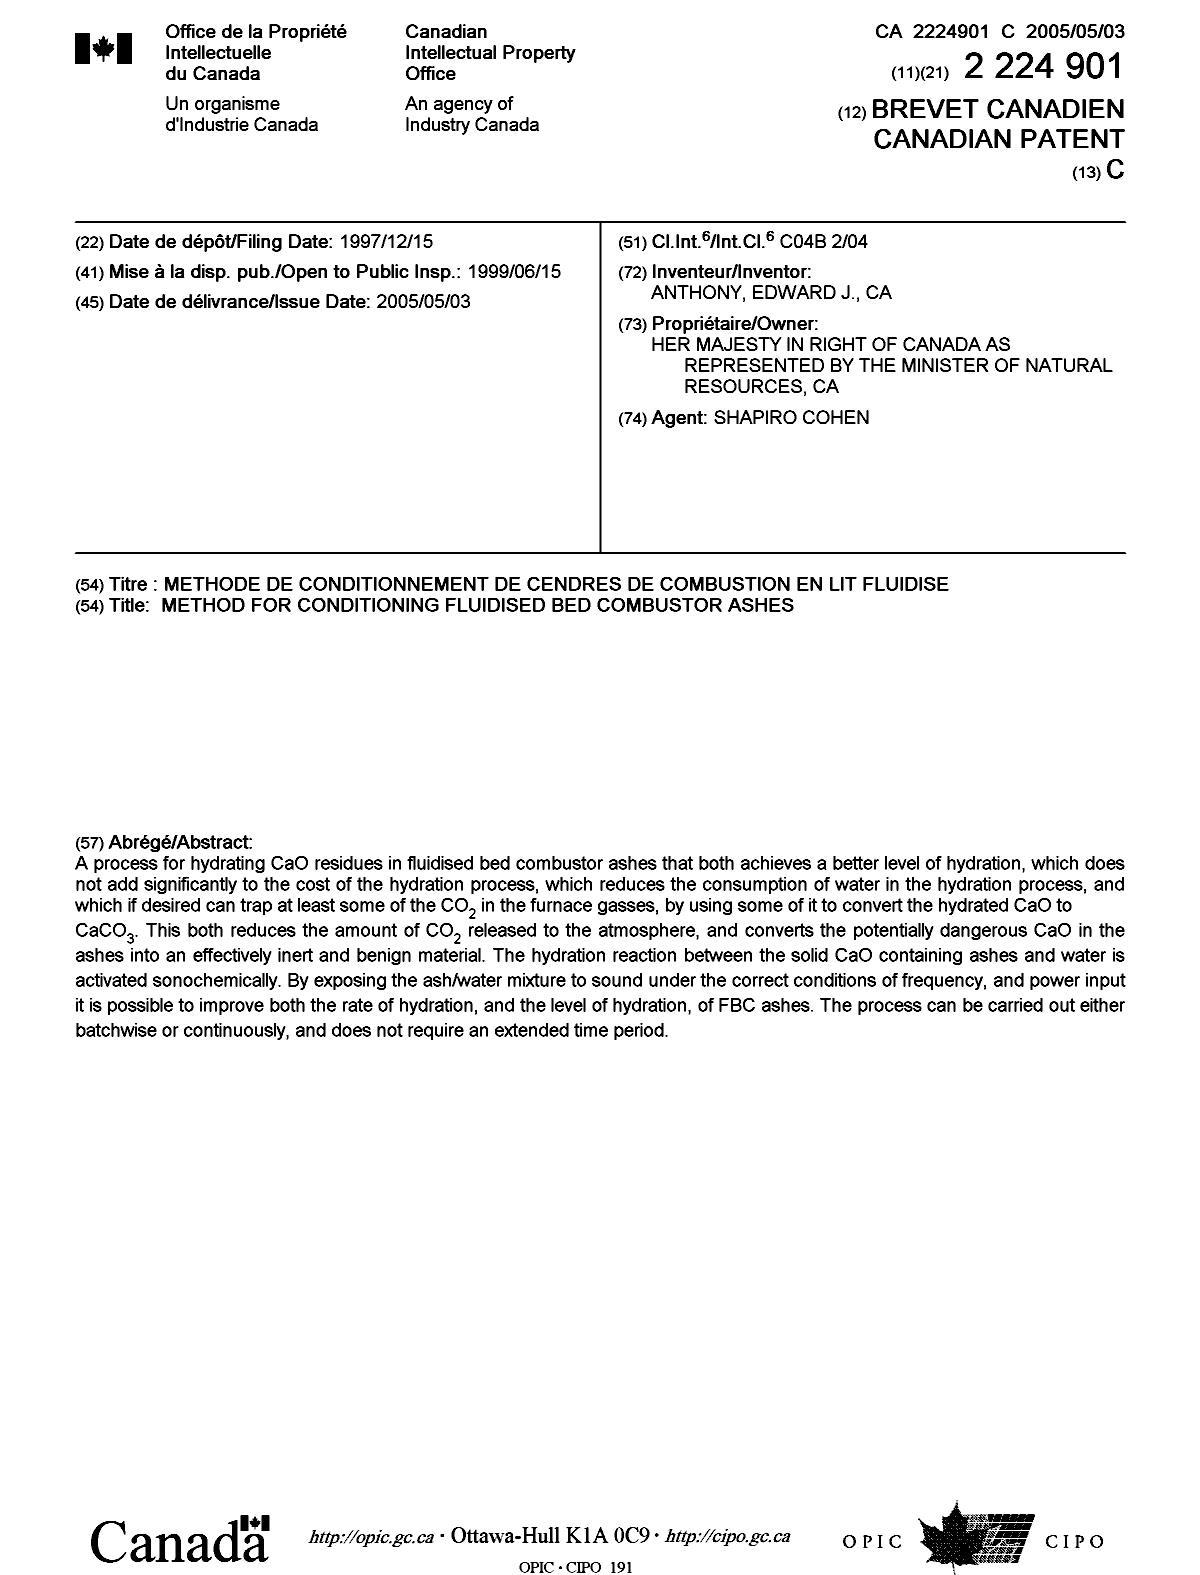 Canadian Patent Document 2224901. Cover Page 20041206. Image 1 of 1